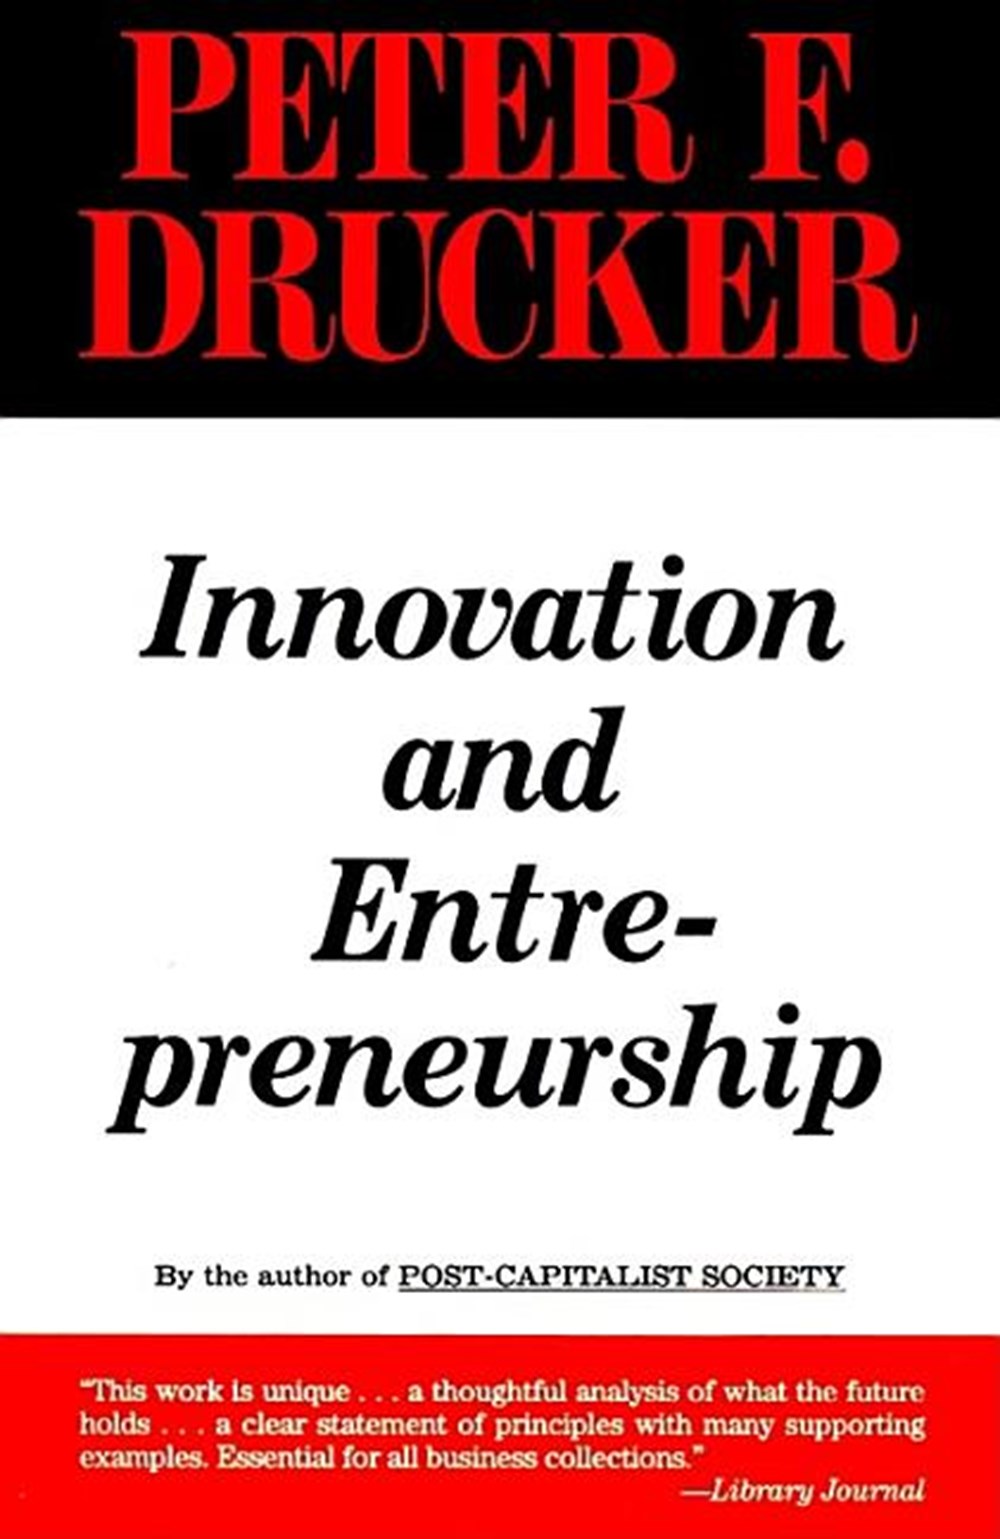 Innovation and Entrepreneurship Practice and Principles